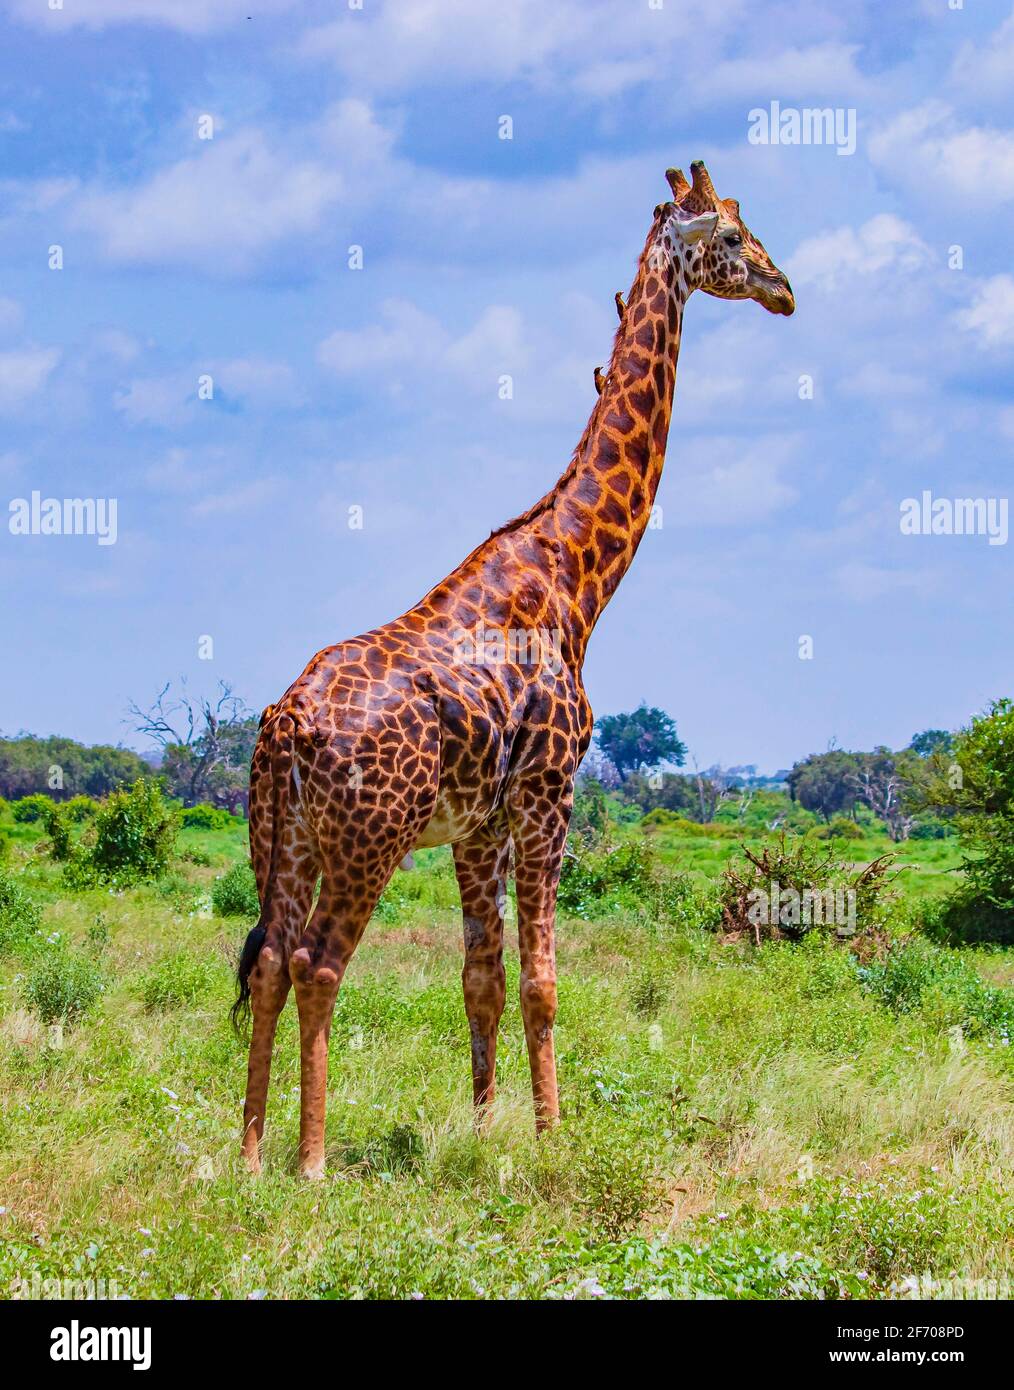 Giraffe standing in tall grass in Tsavo East National Park, Kenya. Birds sitting on the neck of a giraffe. It is a wild life photo. It's a beautiful d Stock Photo